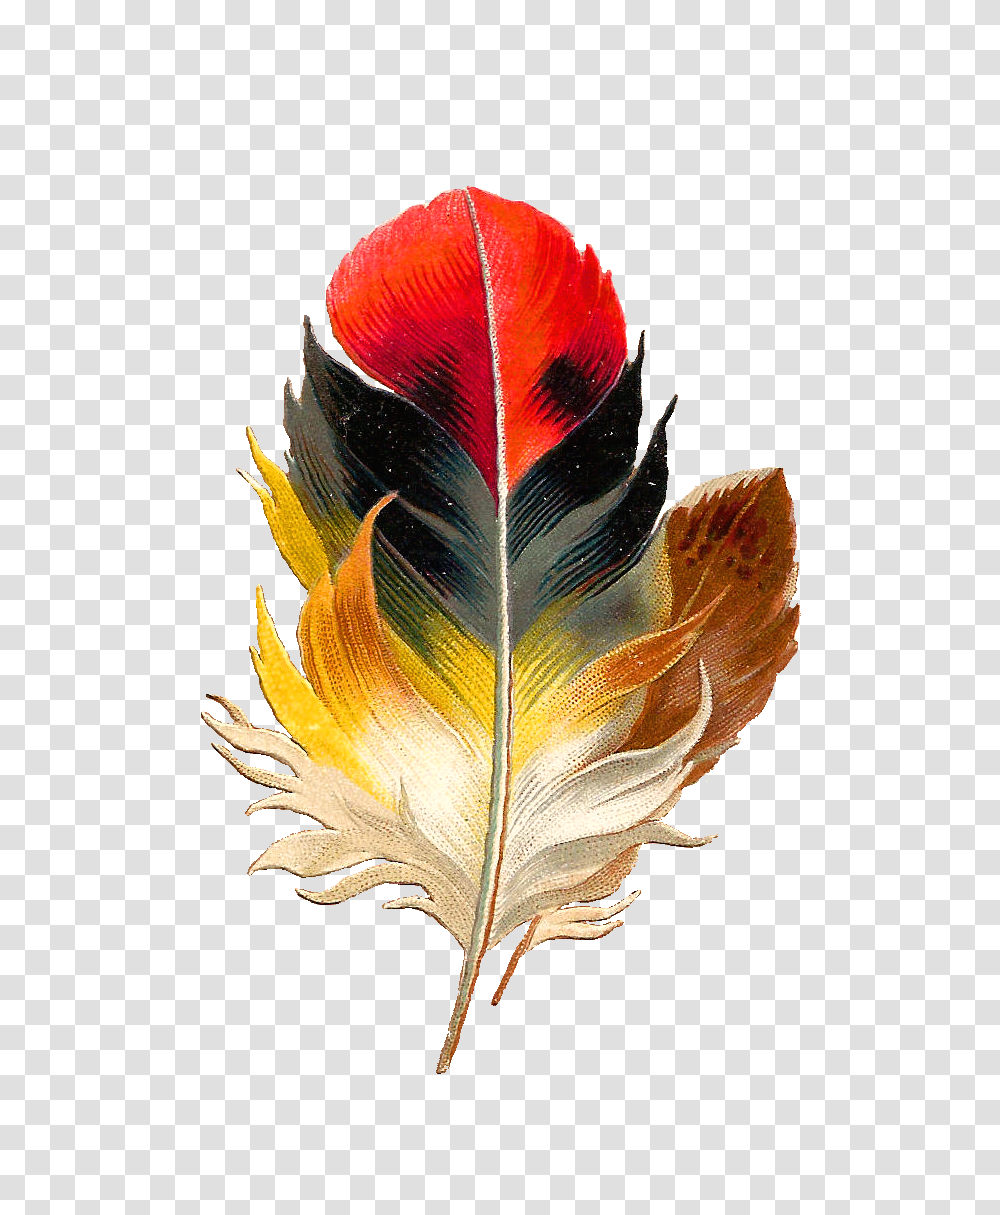 Download Antique Images Clip Art Beautiful Multi Colored Real Colorful Bird Feathers, Leaf, Plant, Bottle, Maple Leaf Transparent Png